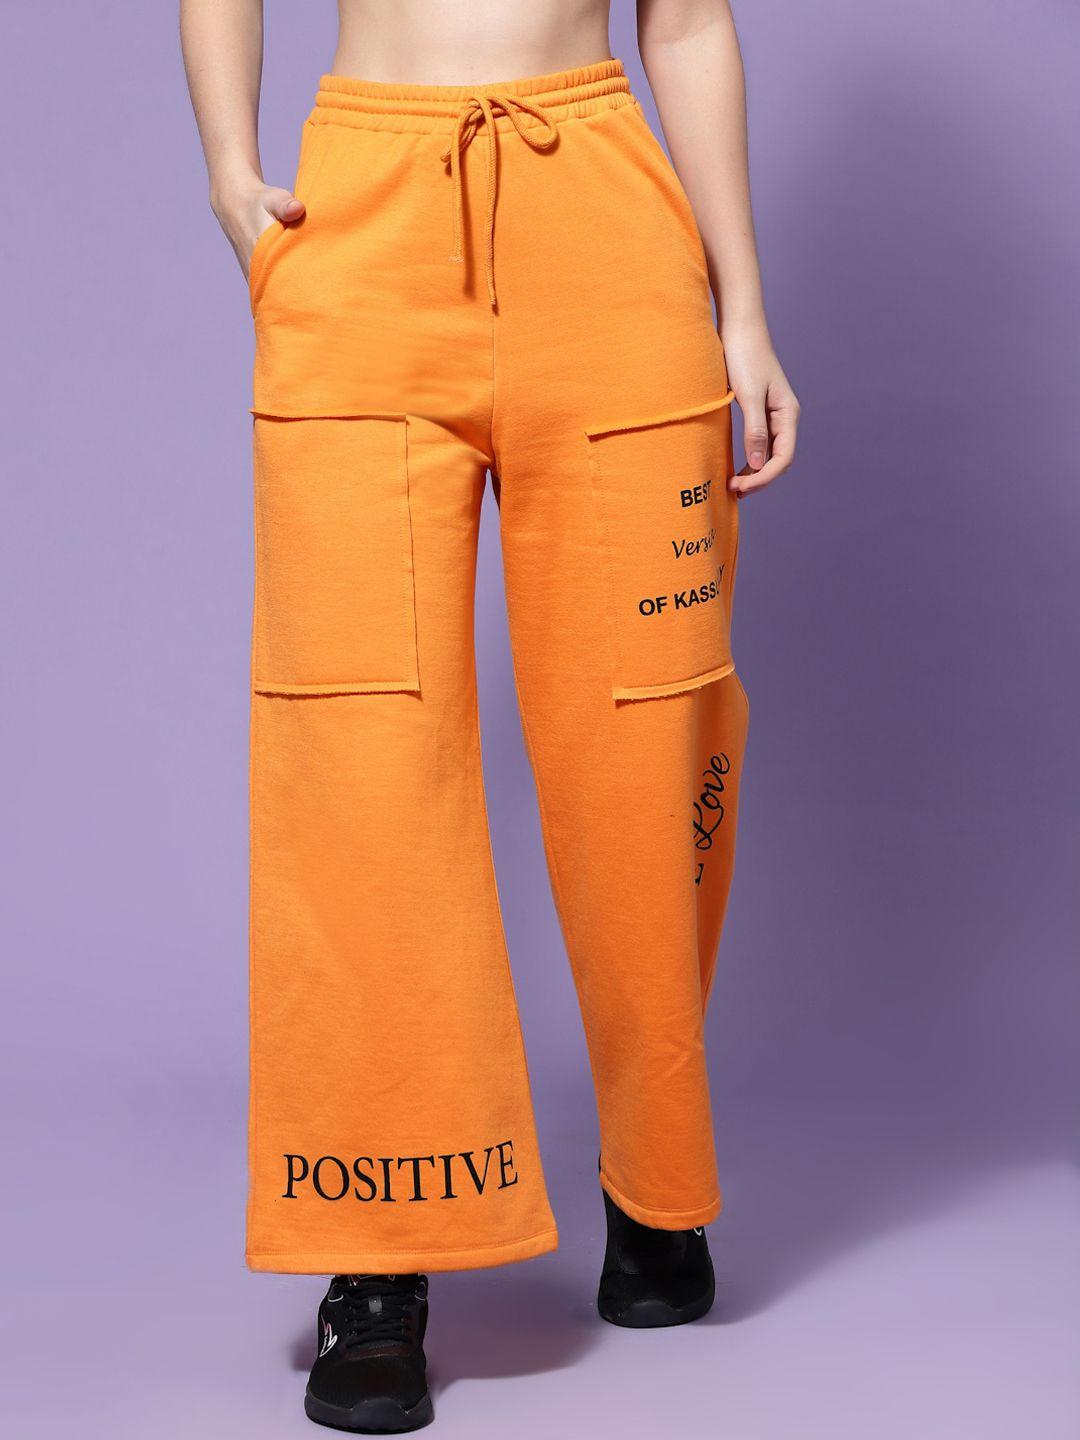 KASSUALLY Typography Loose Fit Cargos Trousers